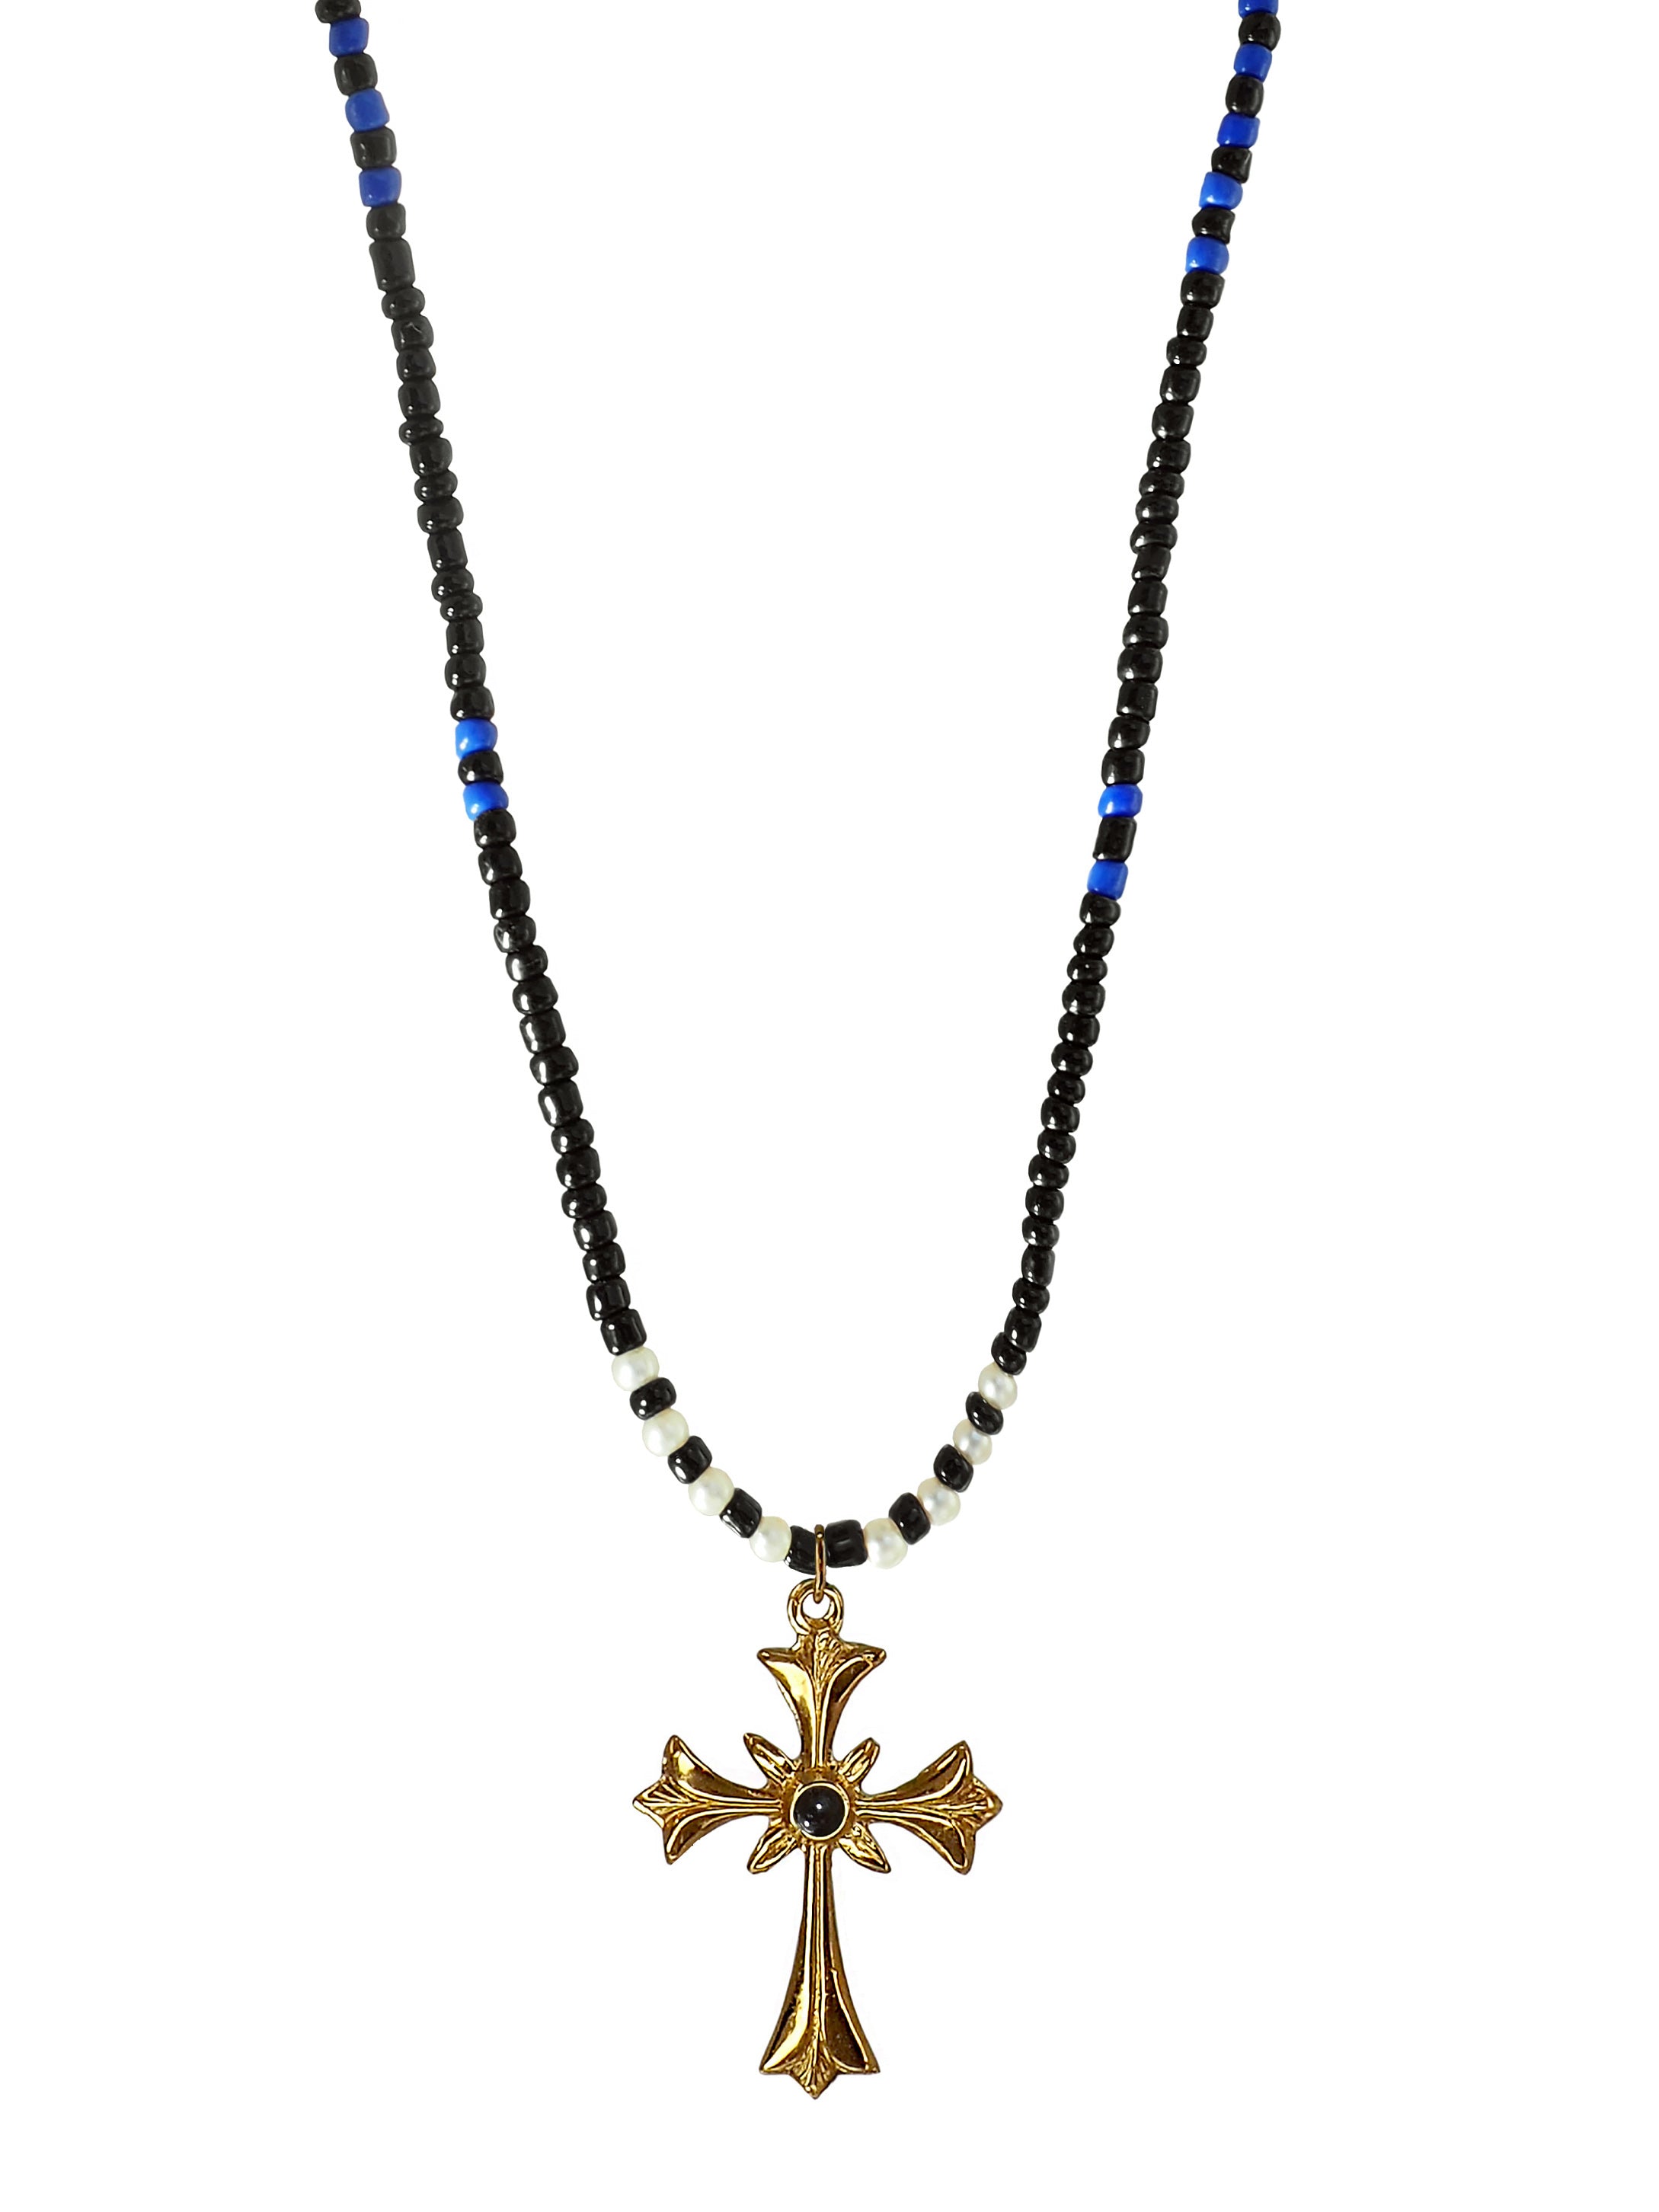 Micro Onyx Cross Necklace | The Gold Gods